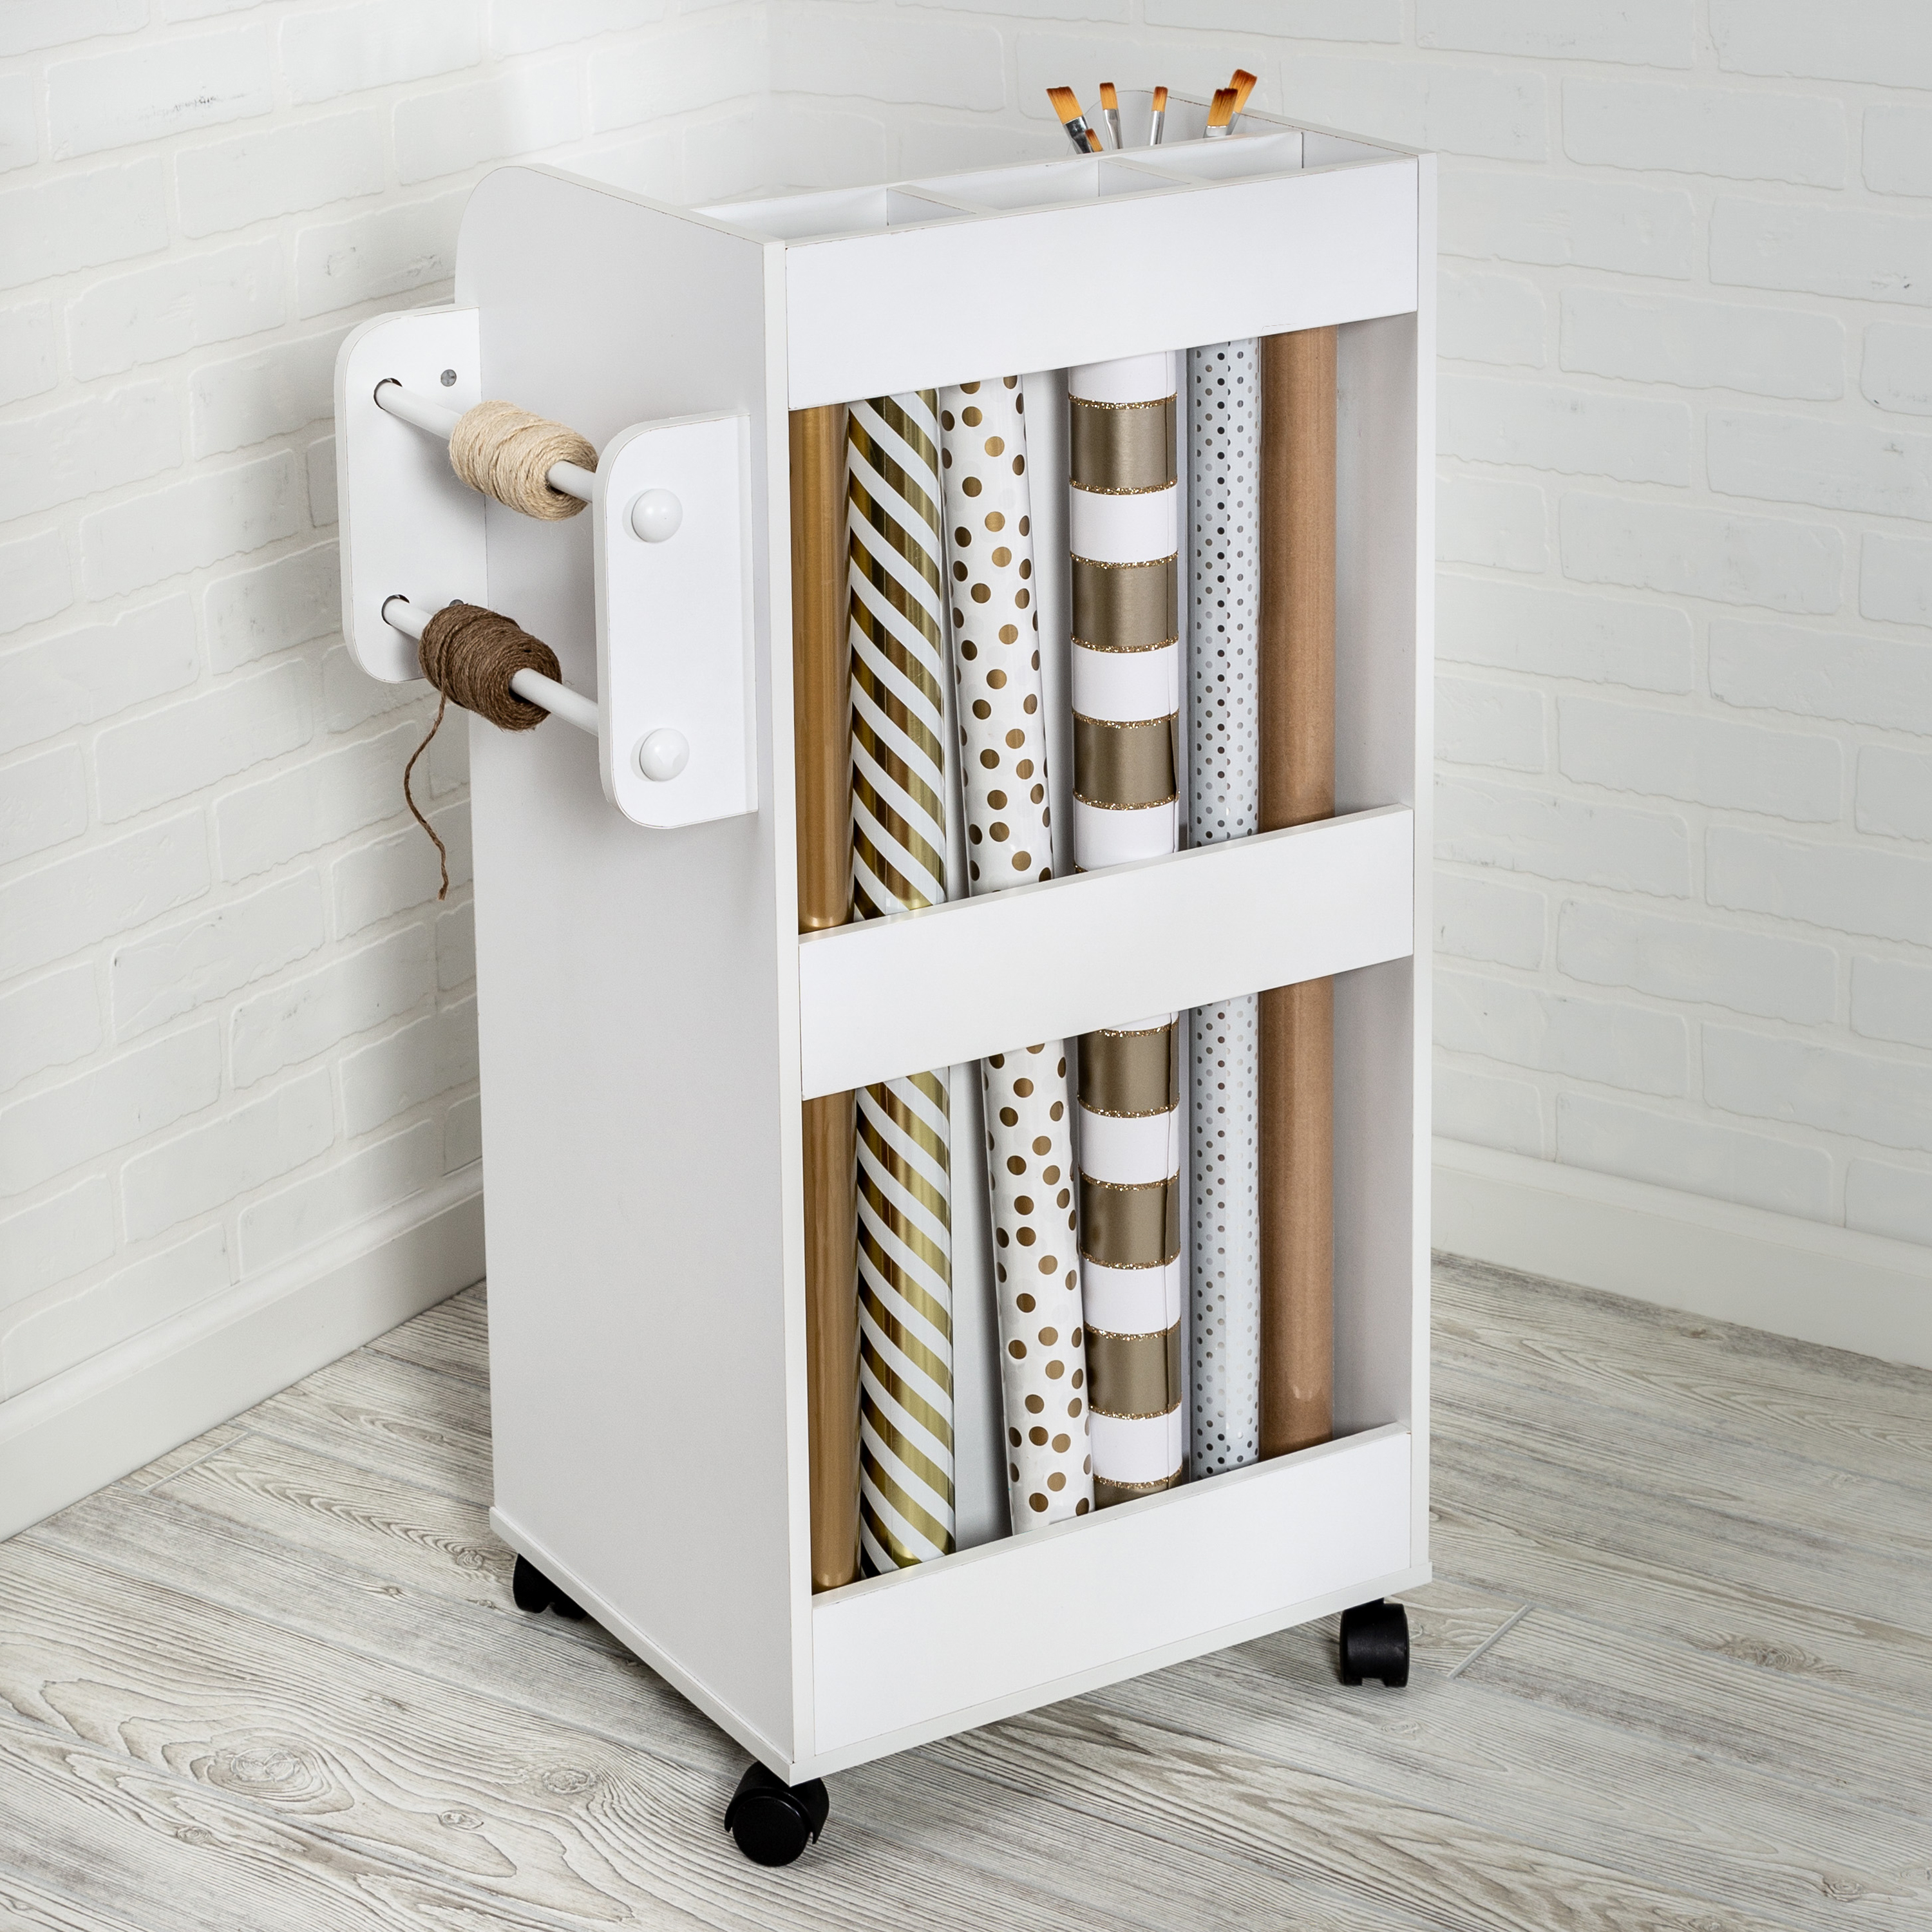 Honey-Can-Do 6-Tier Wood Rolling Craft Storage Cart, White - image 5 of 9